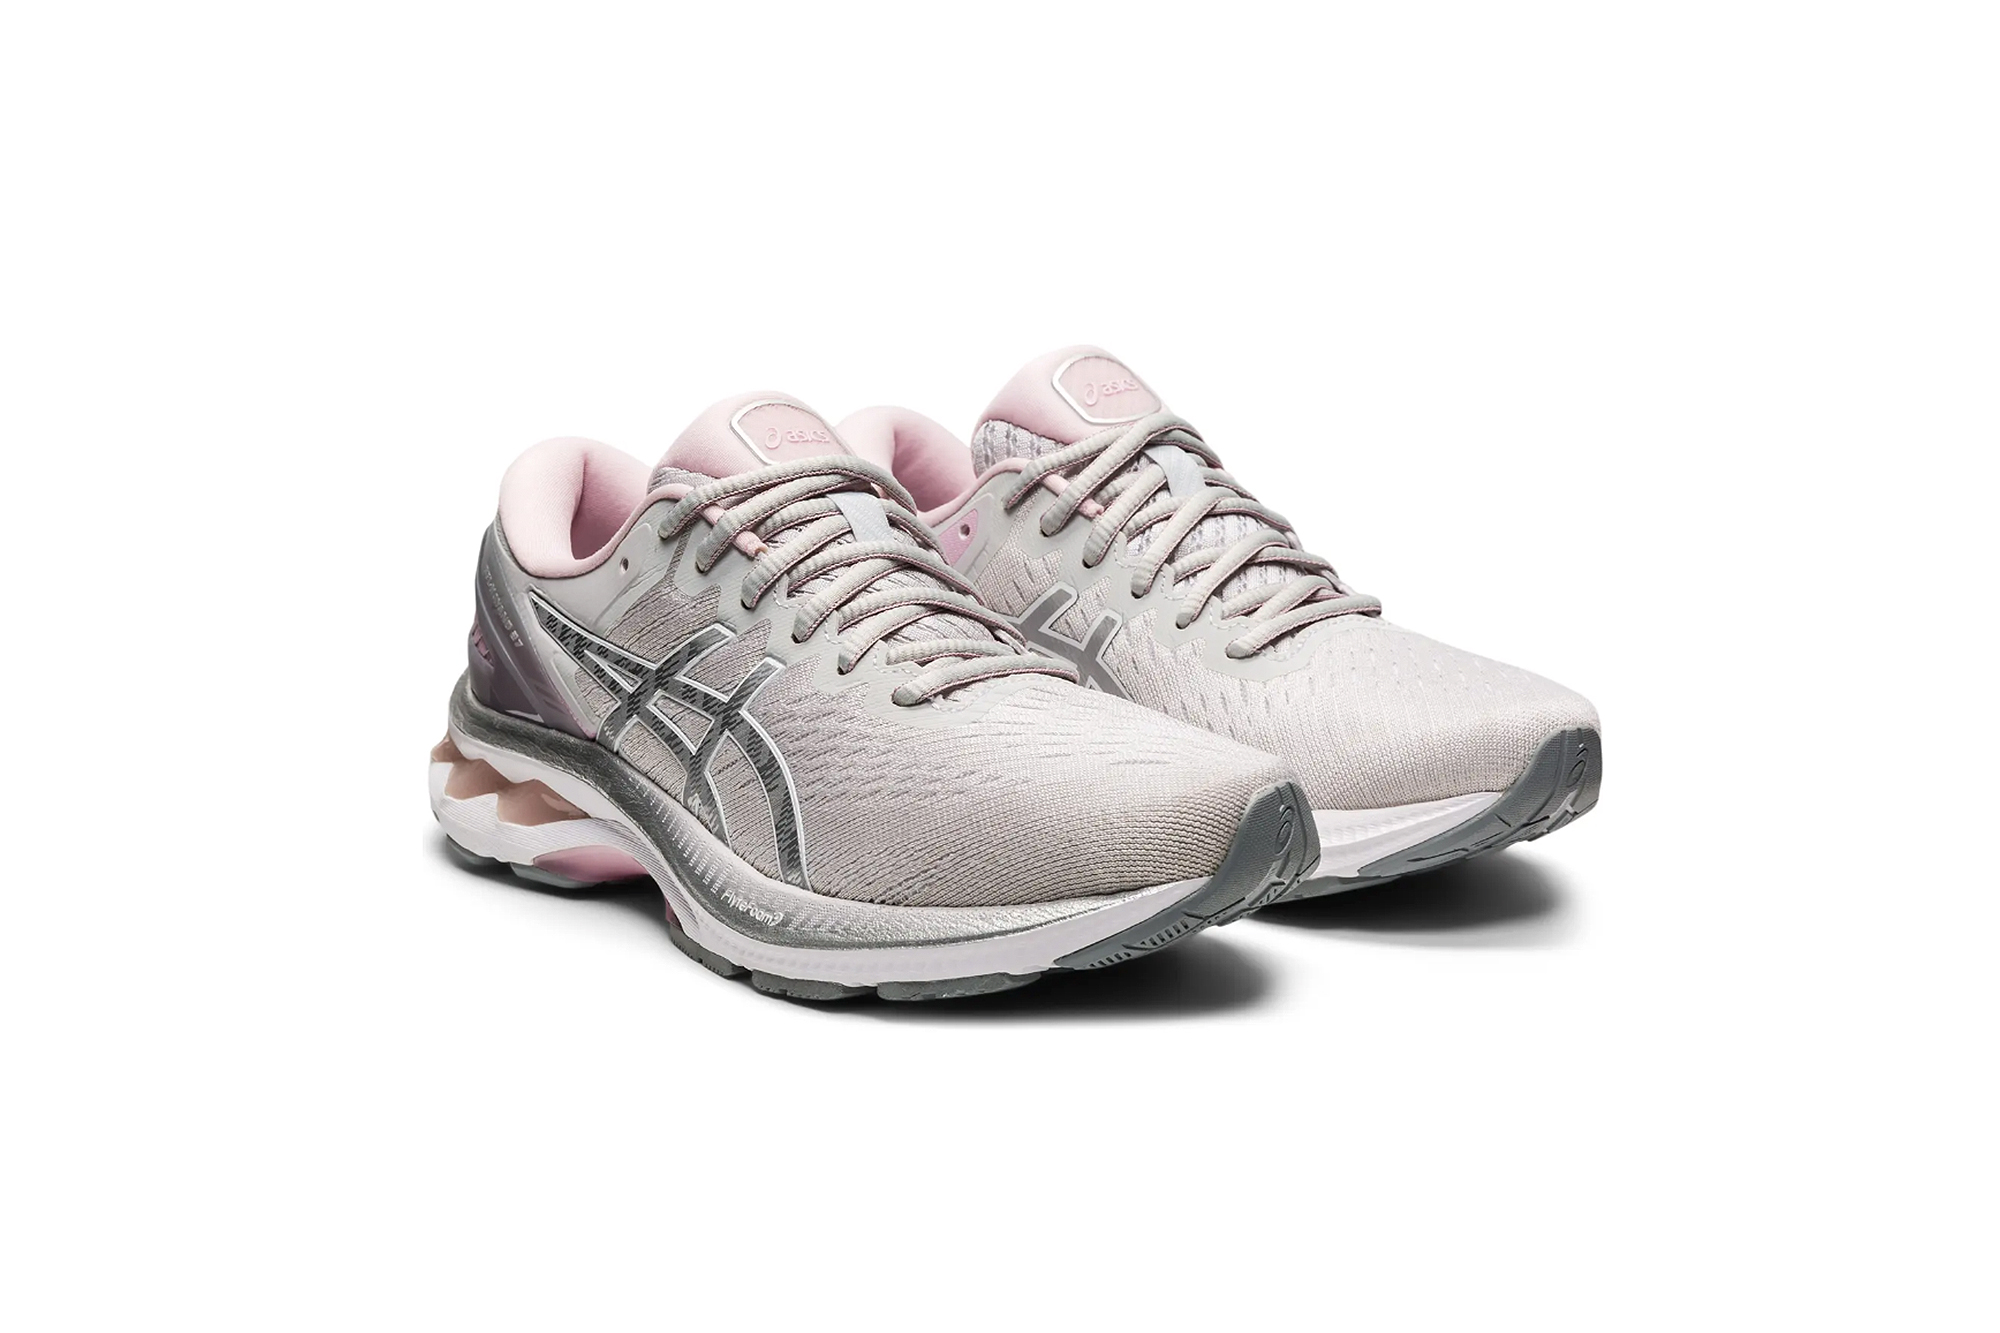 Asics Running Shoes Are $60 Off in the 